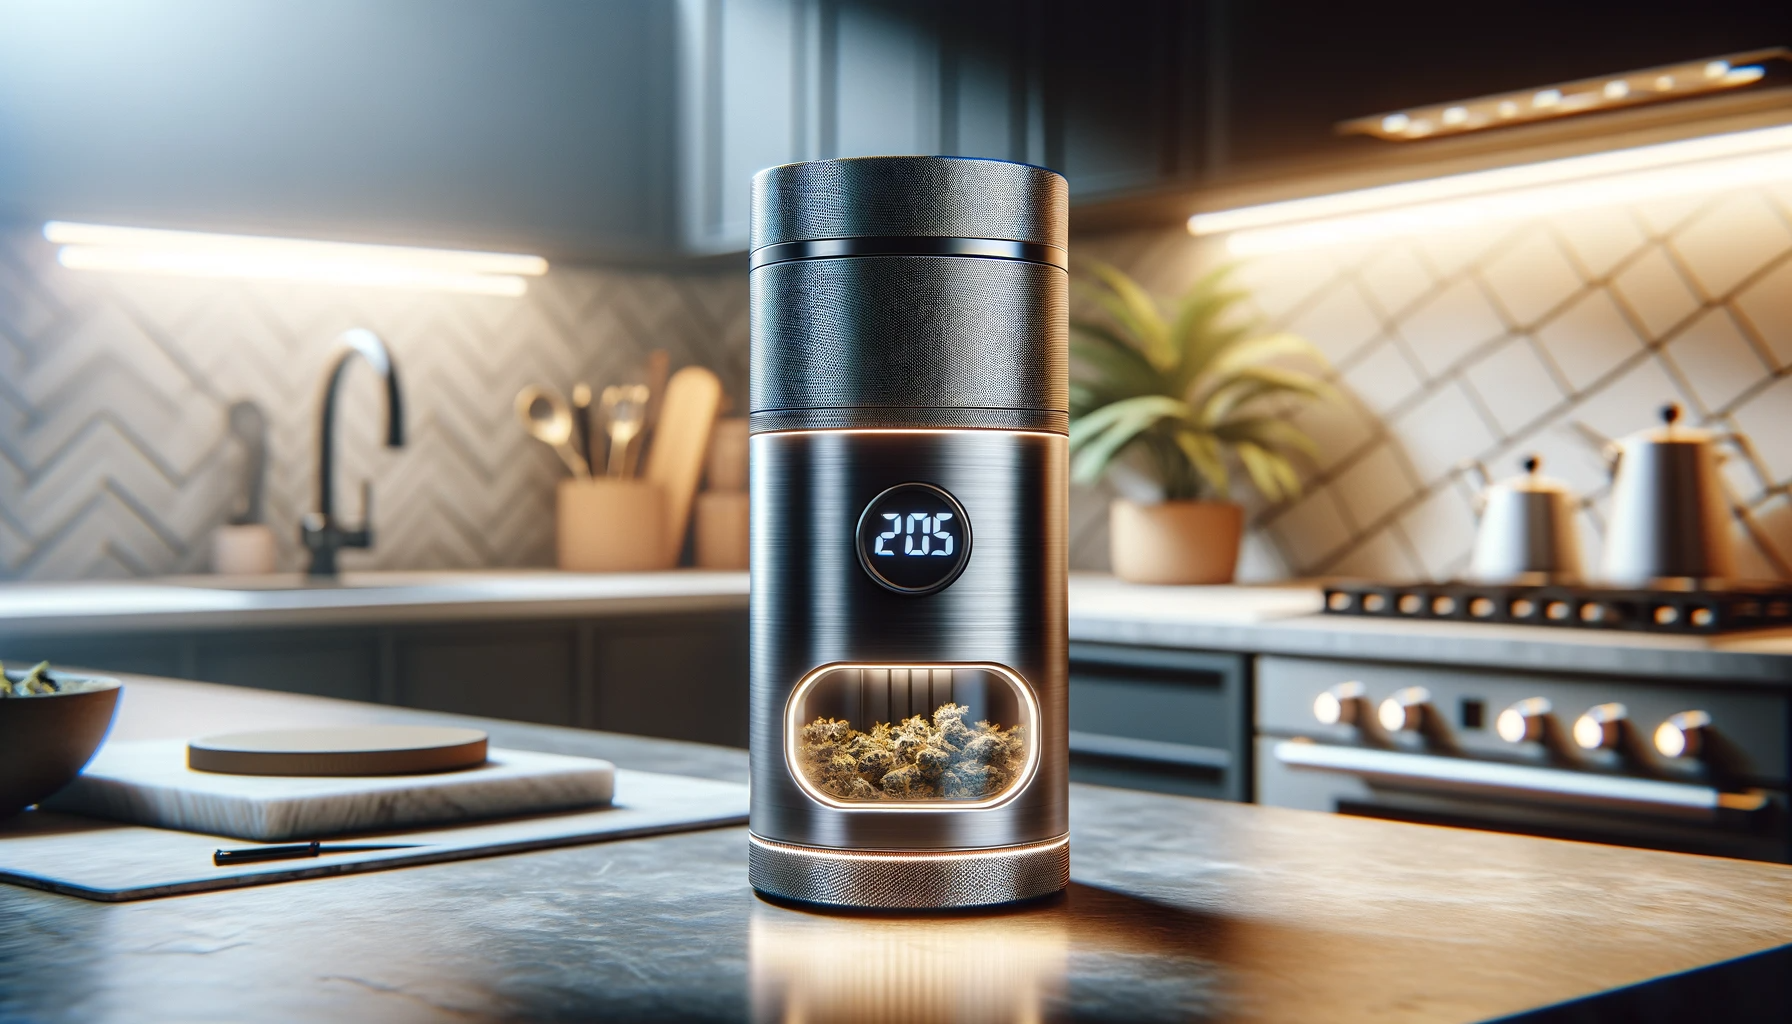 Coffee Grinder One Touch Push-Button Herb Grinder large capacity fast Electric  Spice Herb Coffee Grinder with Pollen Catcher